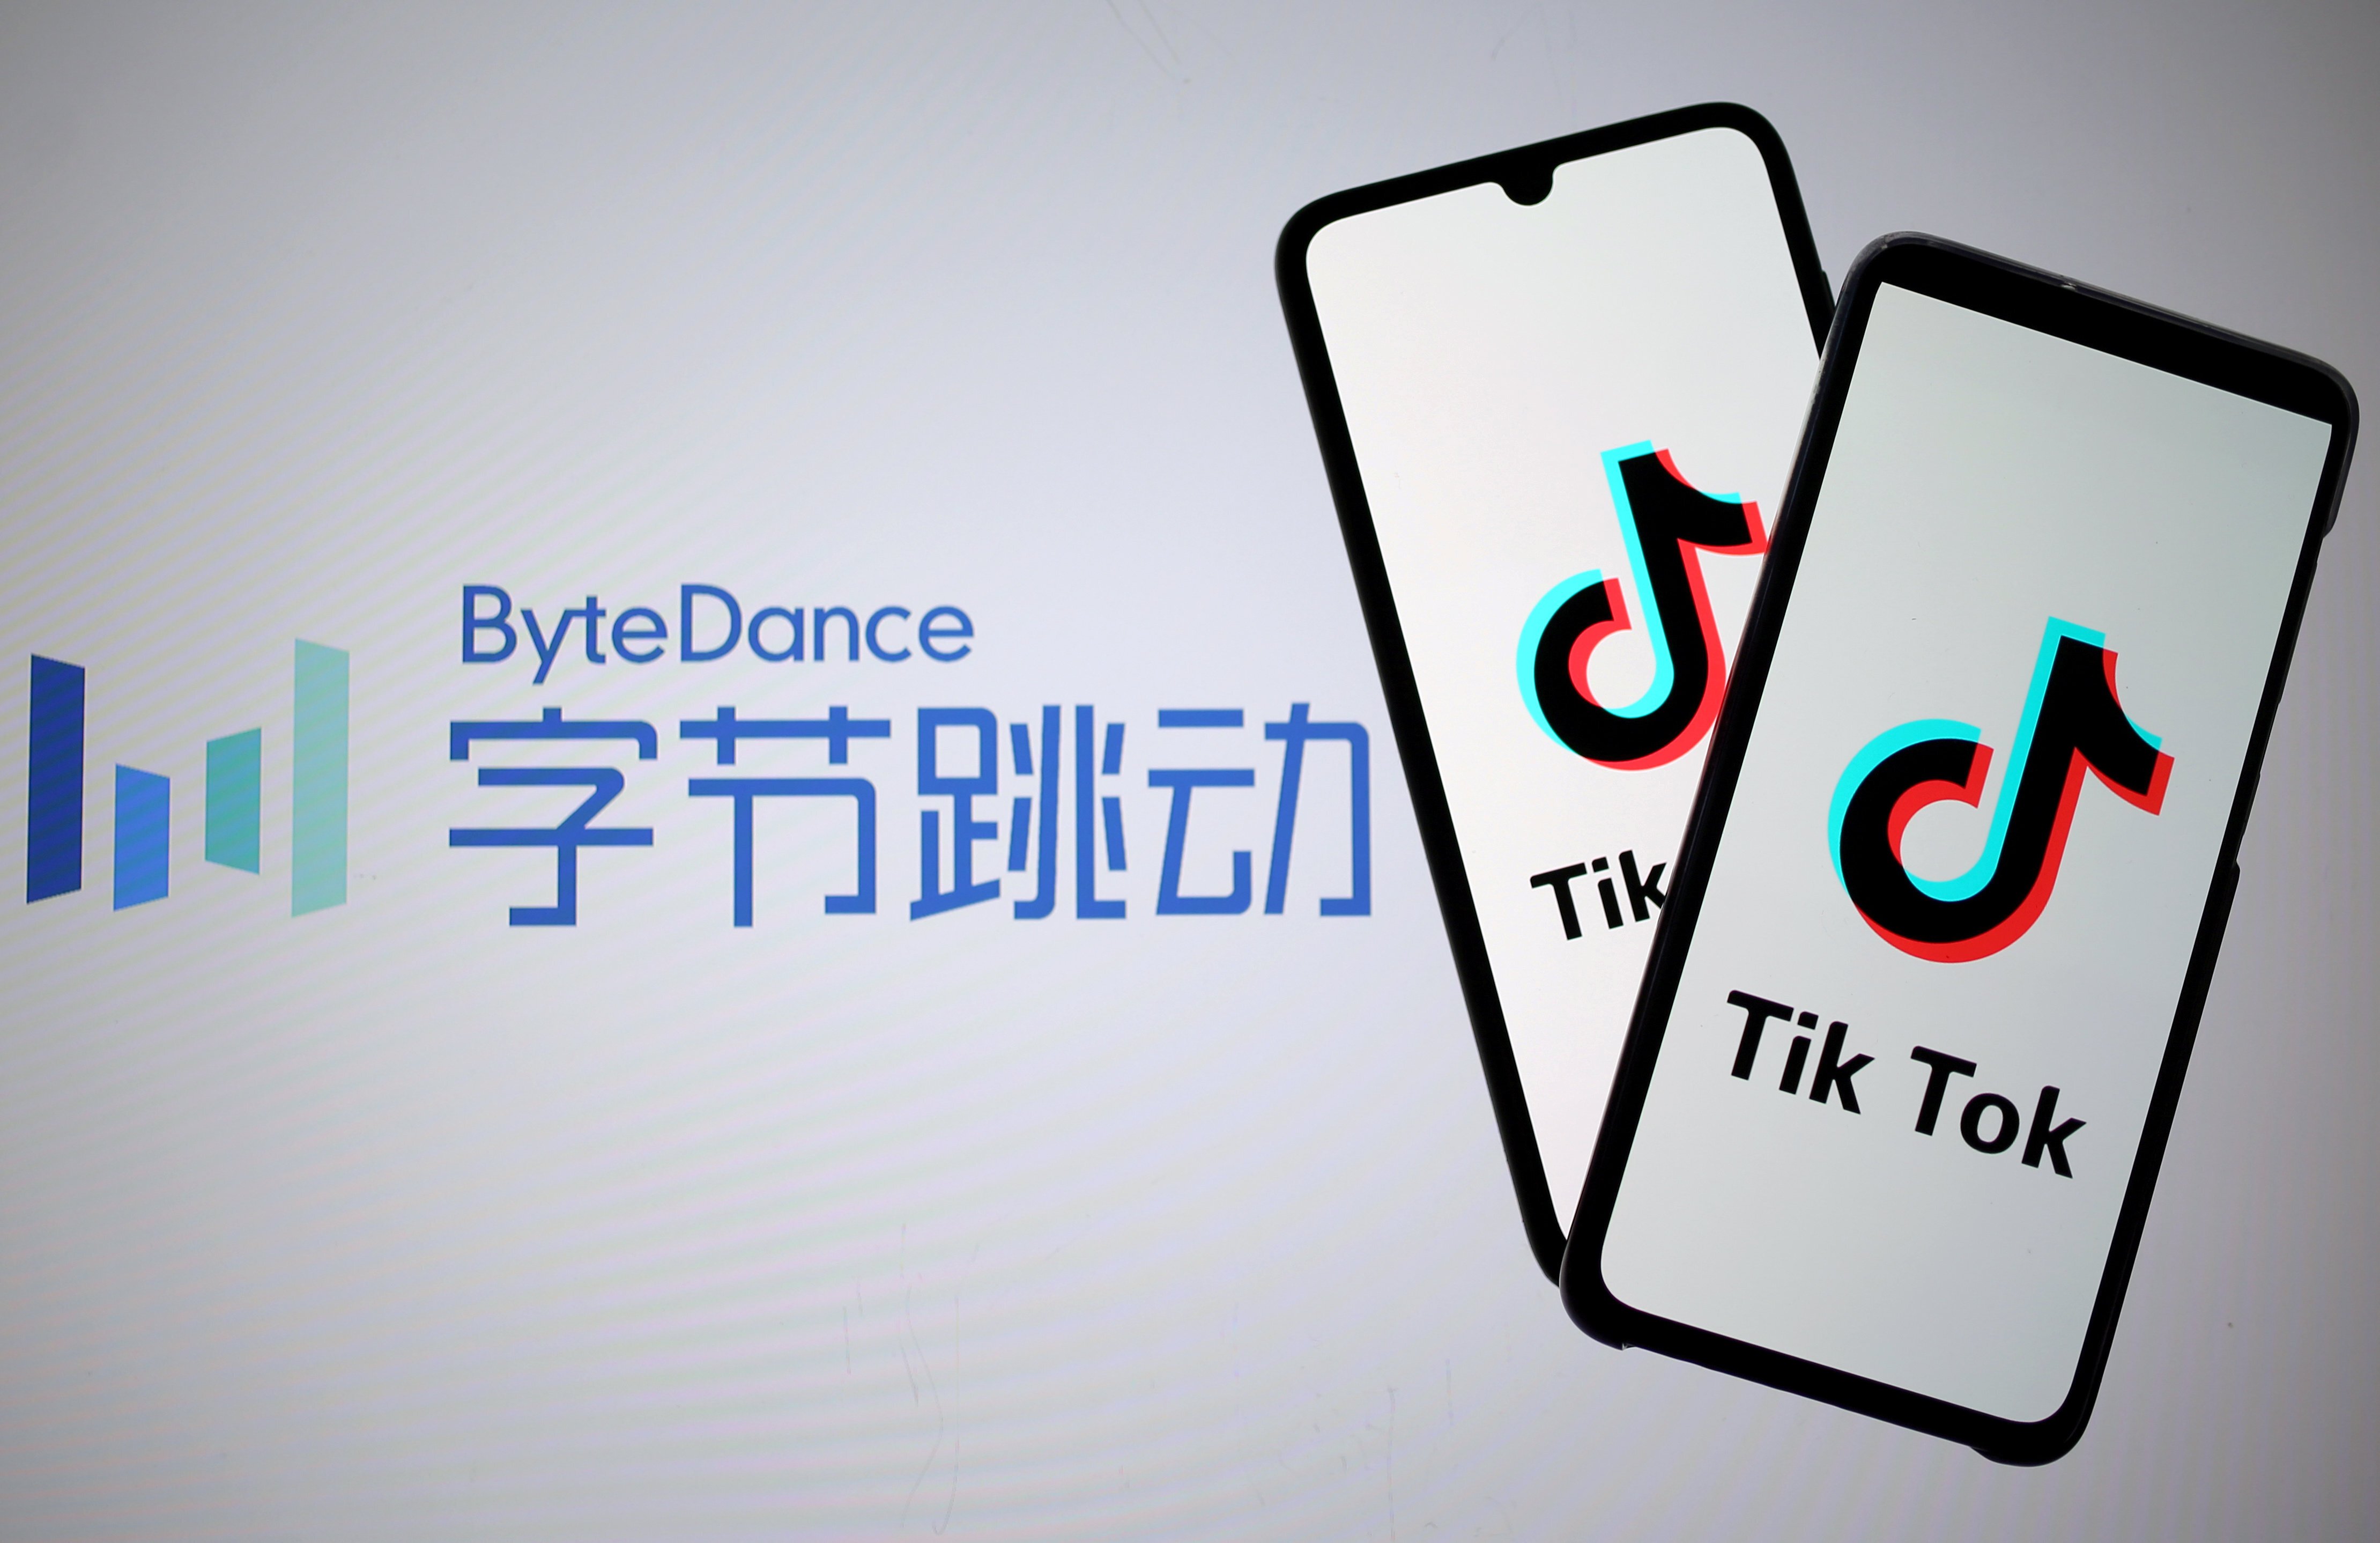 ByteDance is holding off on plans for a public listing because of geopolitical tensions between the US and China, sources told the South China Morning Post. Photo: Reuters